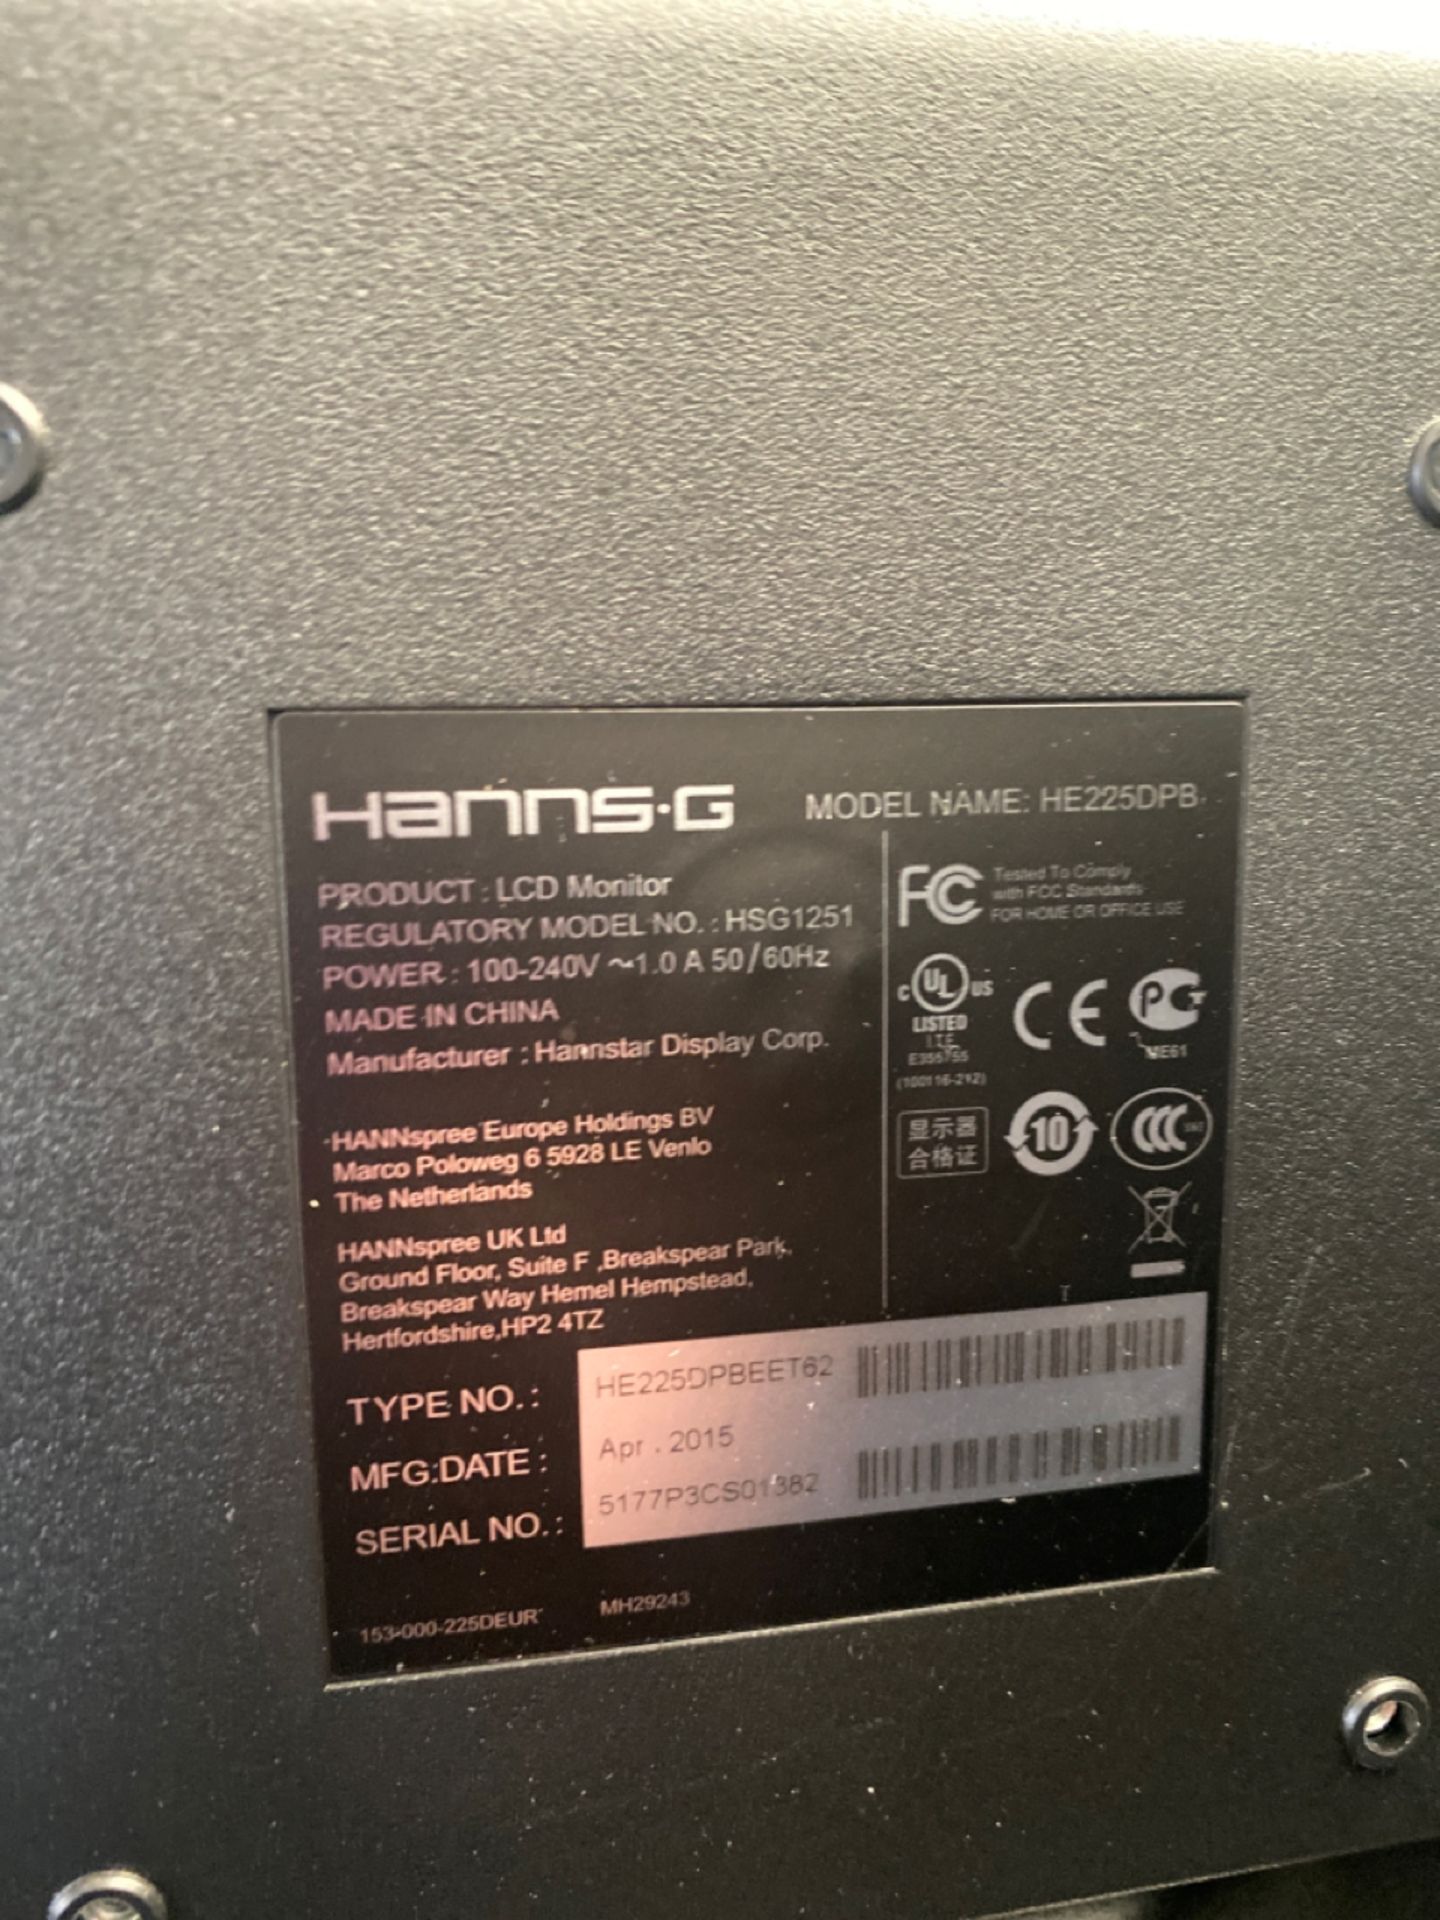 Hanns . G Monitor x9 - Image 7 of 10